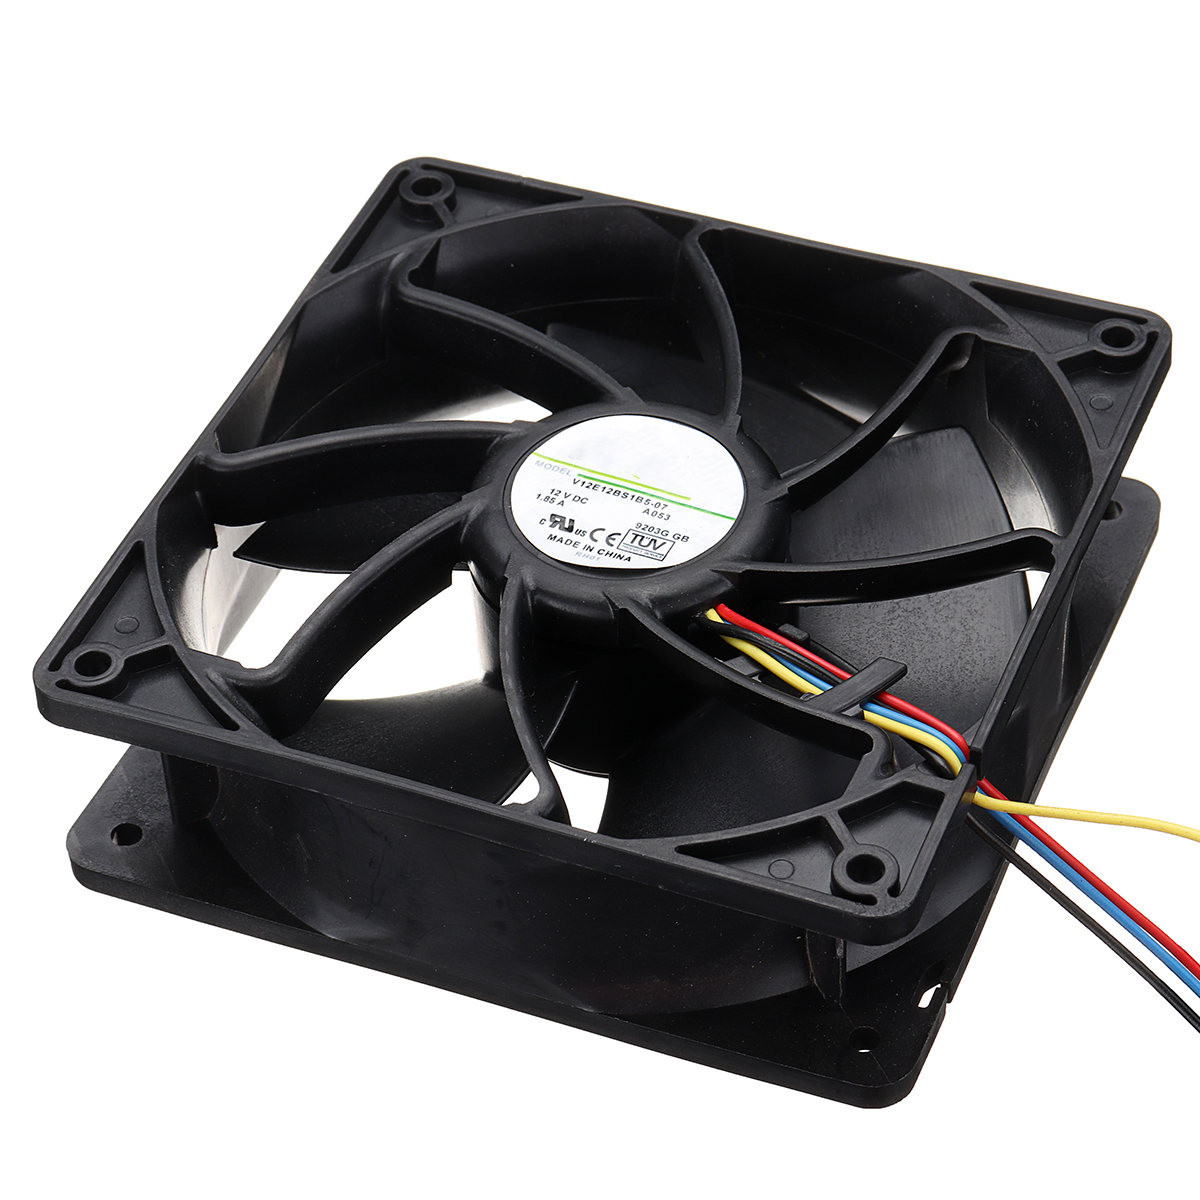 6500RPM-Cooling-Fan-Vovomay-Replacement-4-pin-Connector-for-Antminer-Bitmain-S7-S9-1386324-5